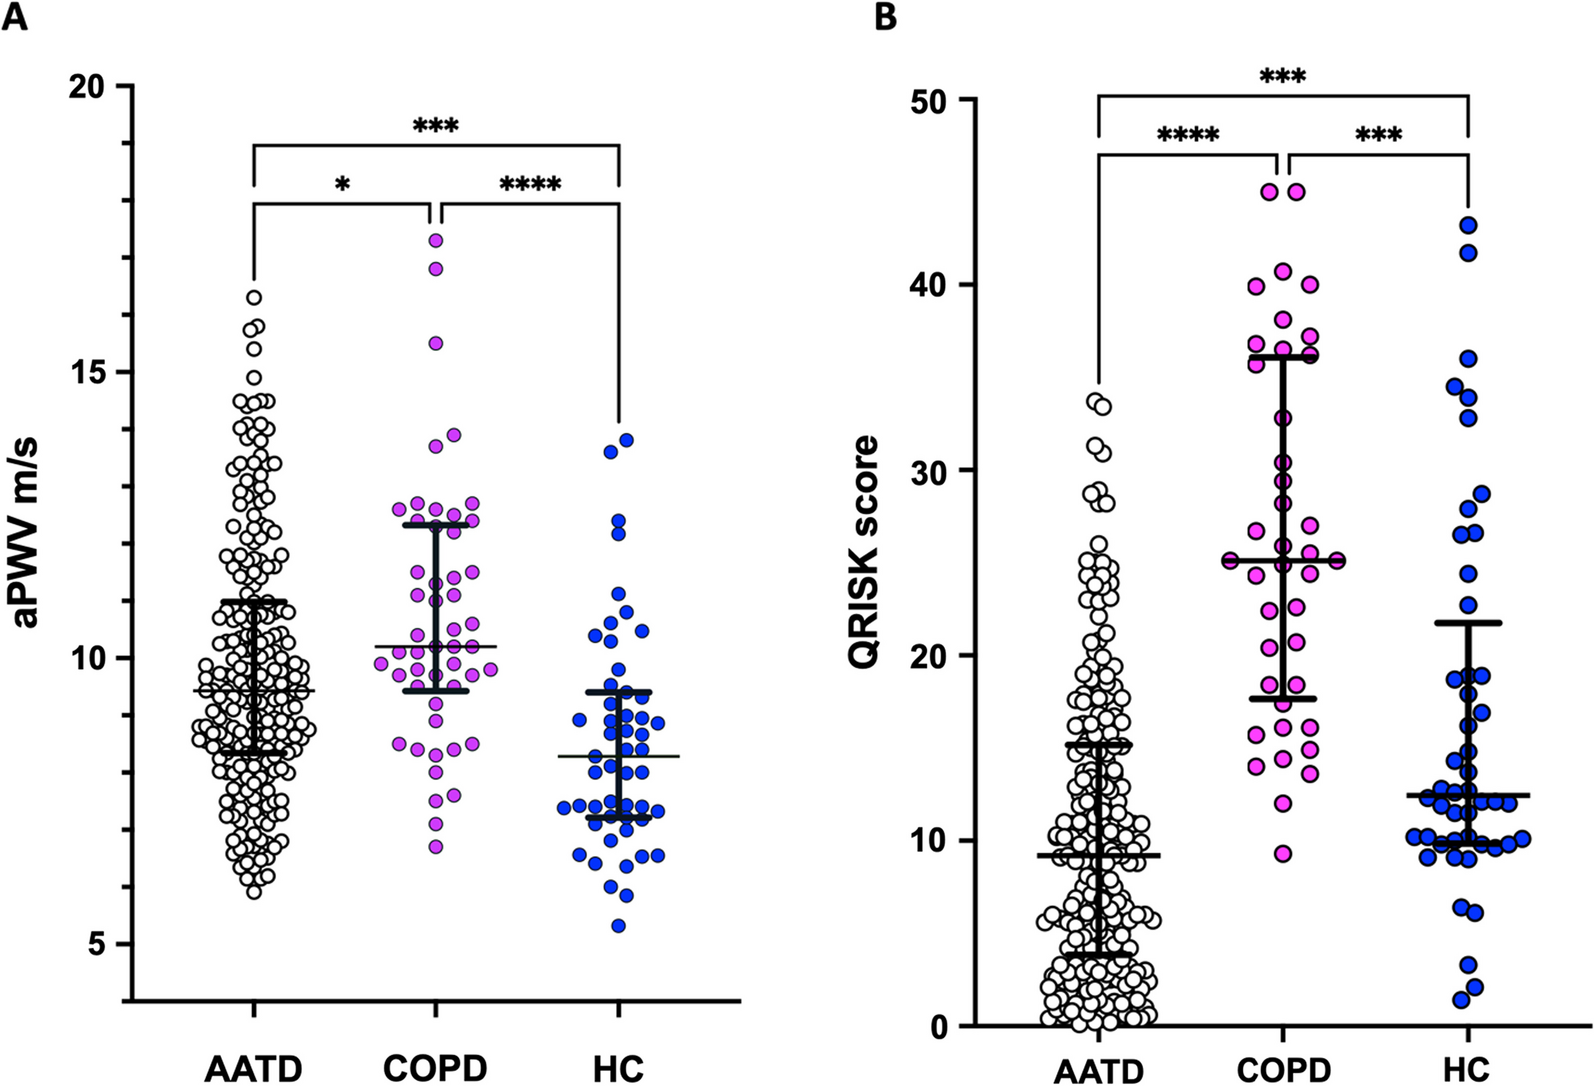 Cardiovascular disease in Alpha 1 antitrypsin deficiency: an observational study assessing the role of neutrophil proteinase activity and the suitability of validated screening tools